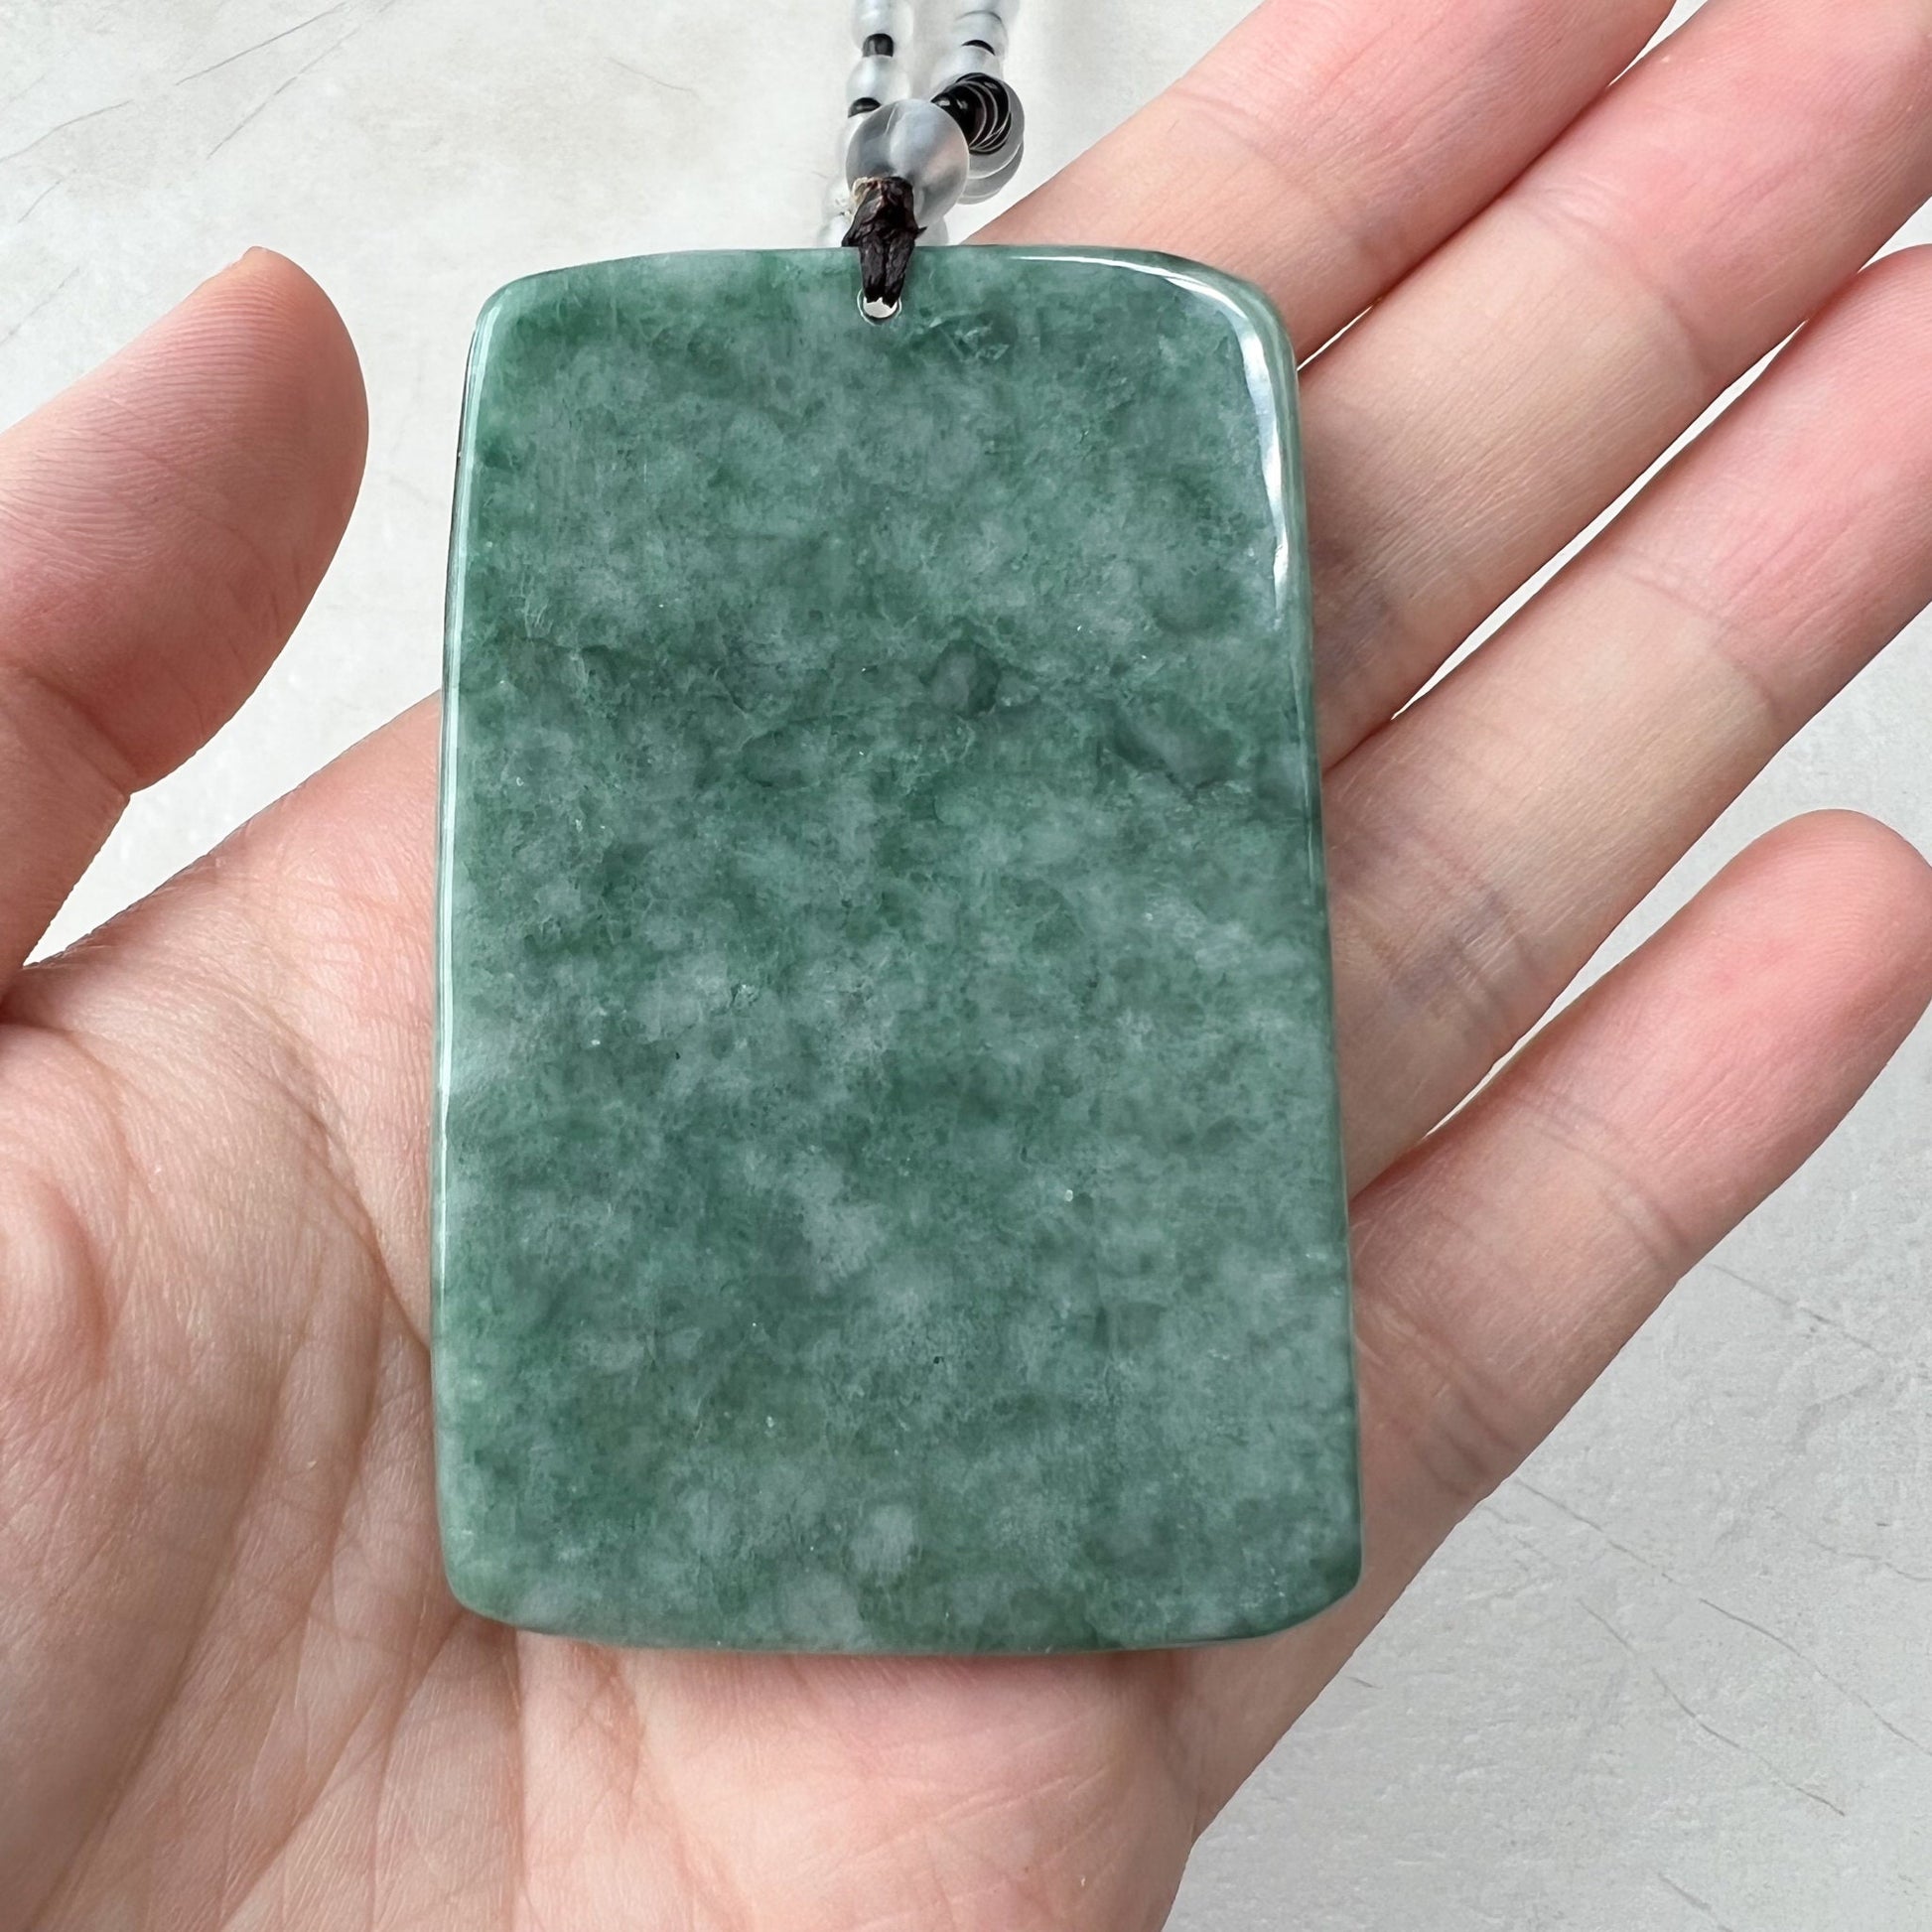 Large Tree Jade Pendant, Mountain Forest River Scenery, Hand Carved Pendant Necklace, YJ-0921-0179910 - AriaDesignCollection